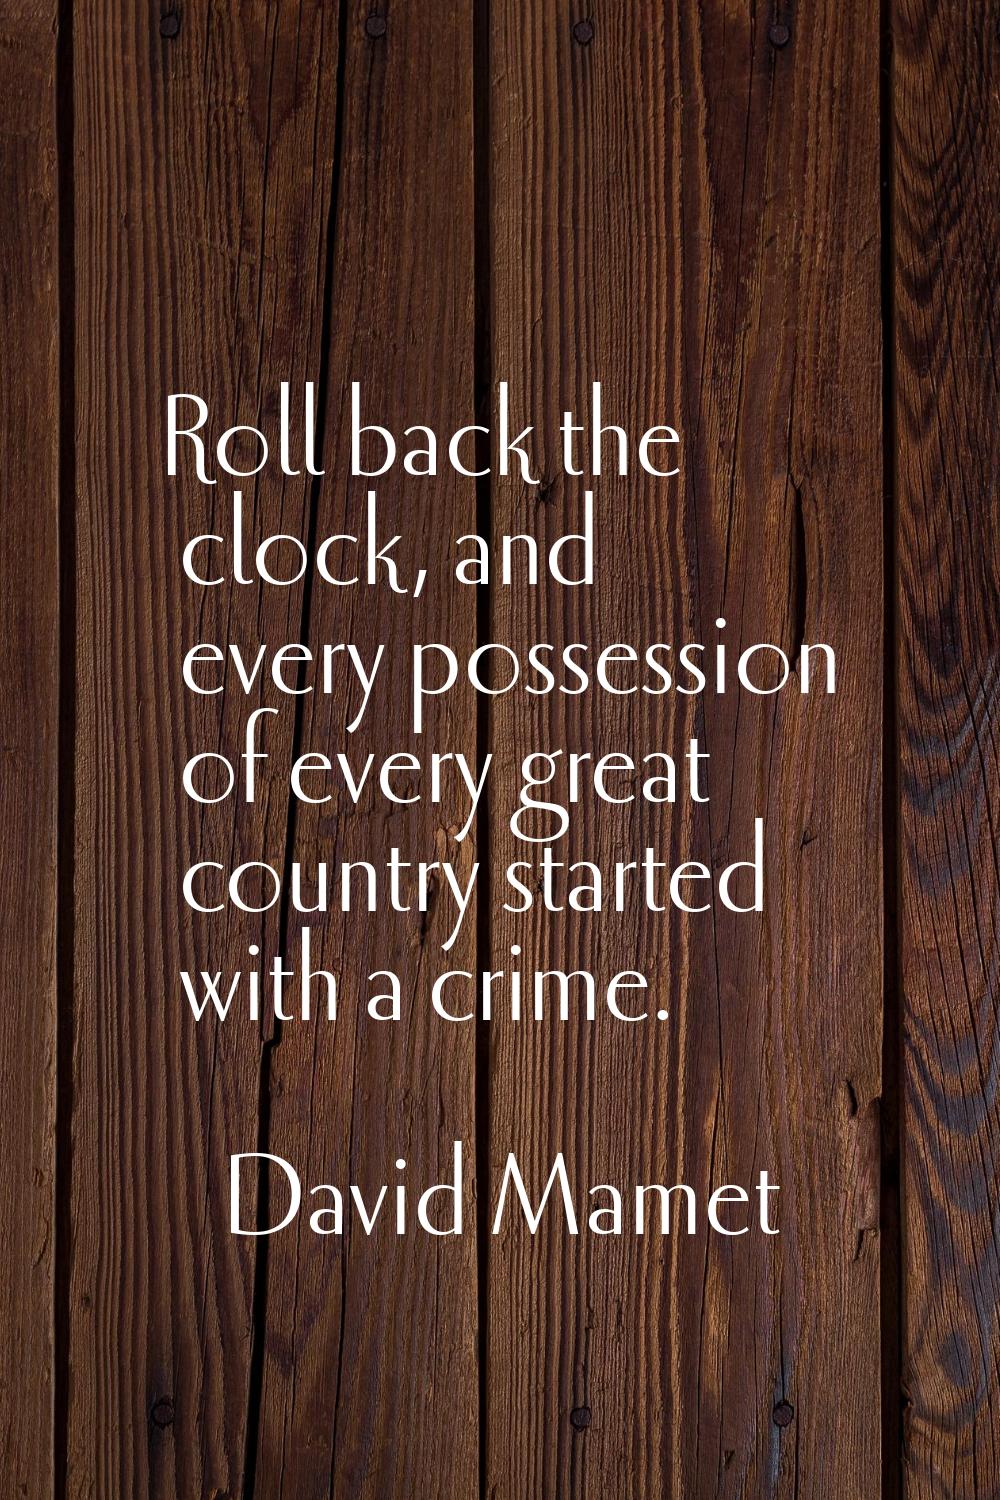 Roll back the clock, and every possession of every great country started with a crime.